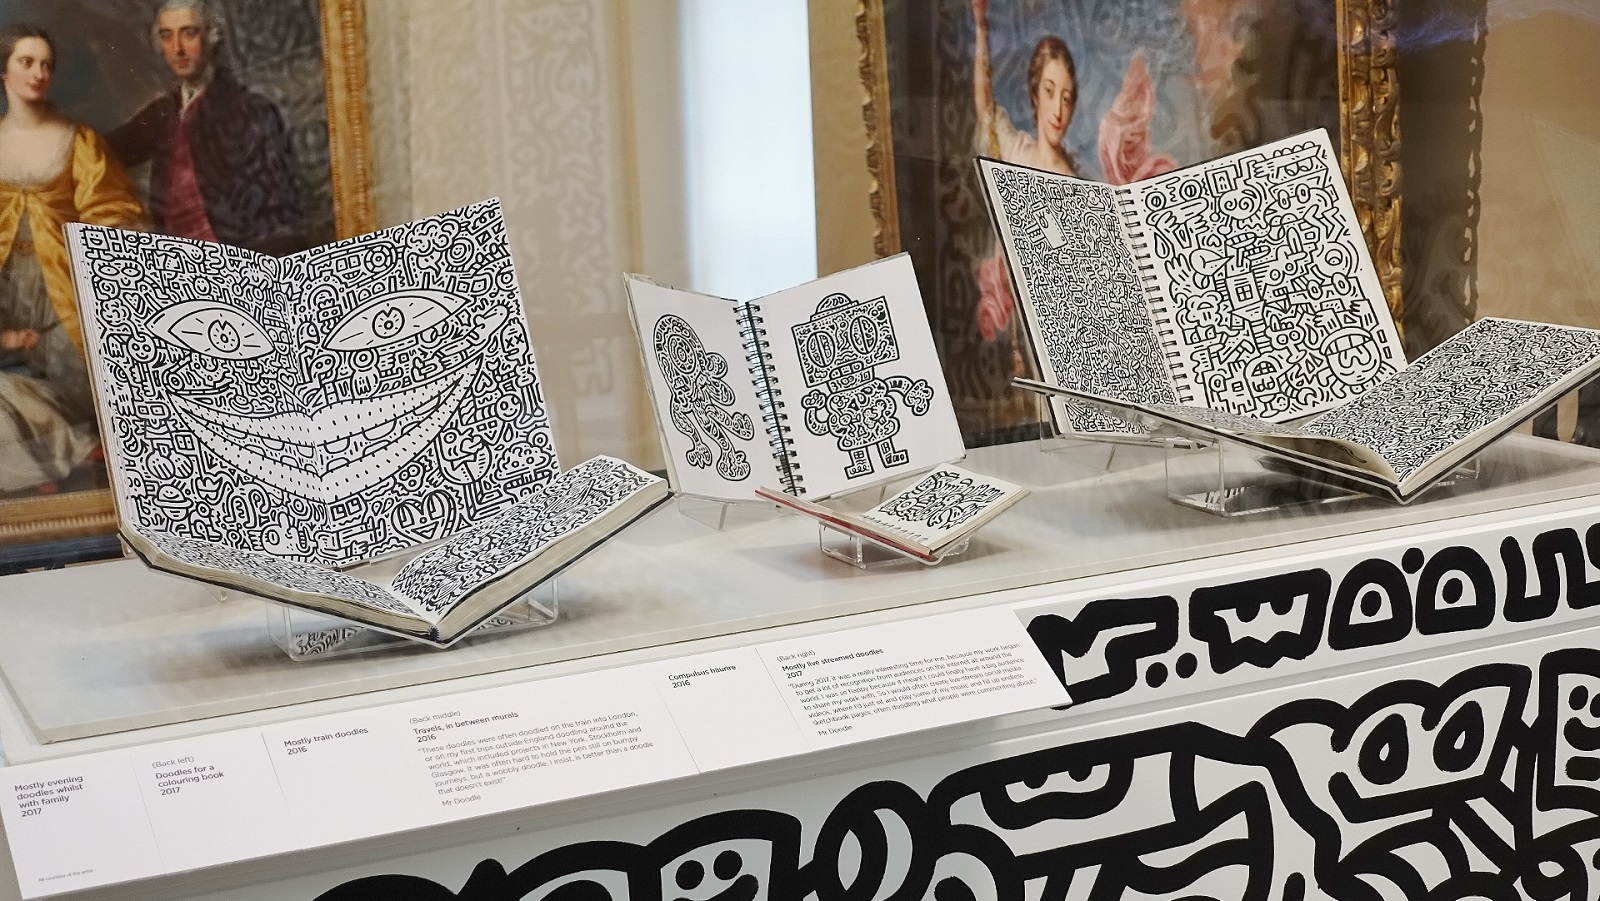 A series of sketchbooks filled with black and white doodle art by Mr Doodle, in a glass display case. Behind them are classical pil paintings, in contrast to the modern doodling.